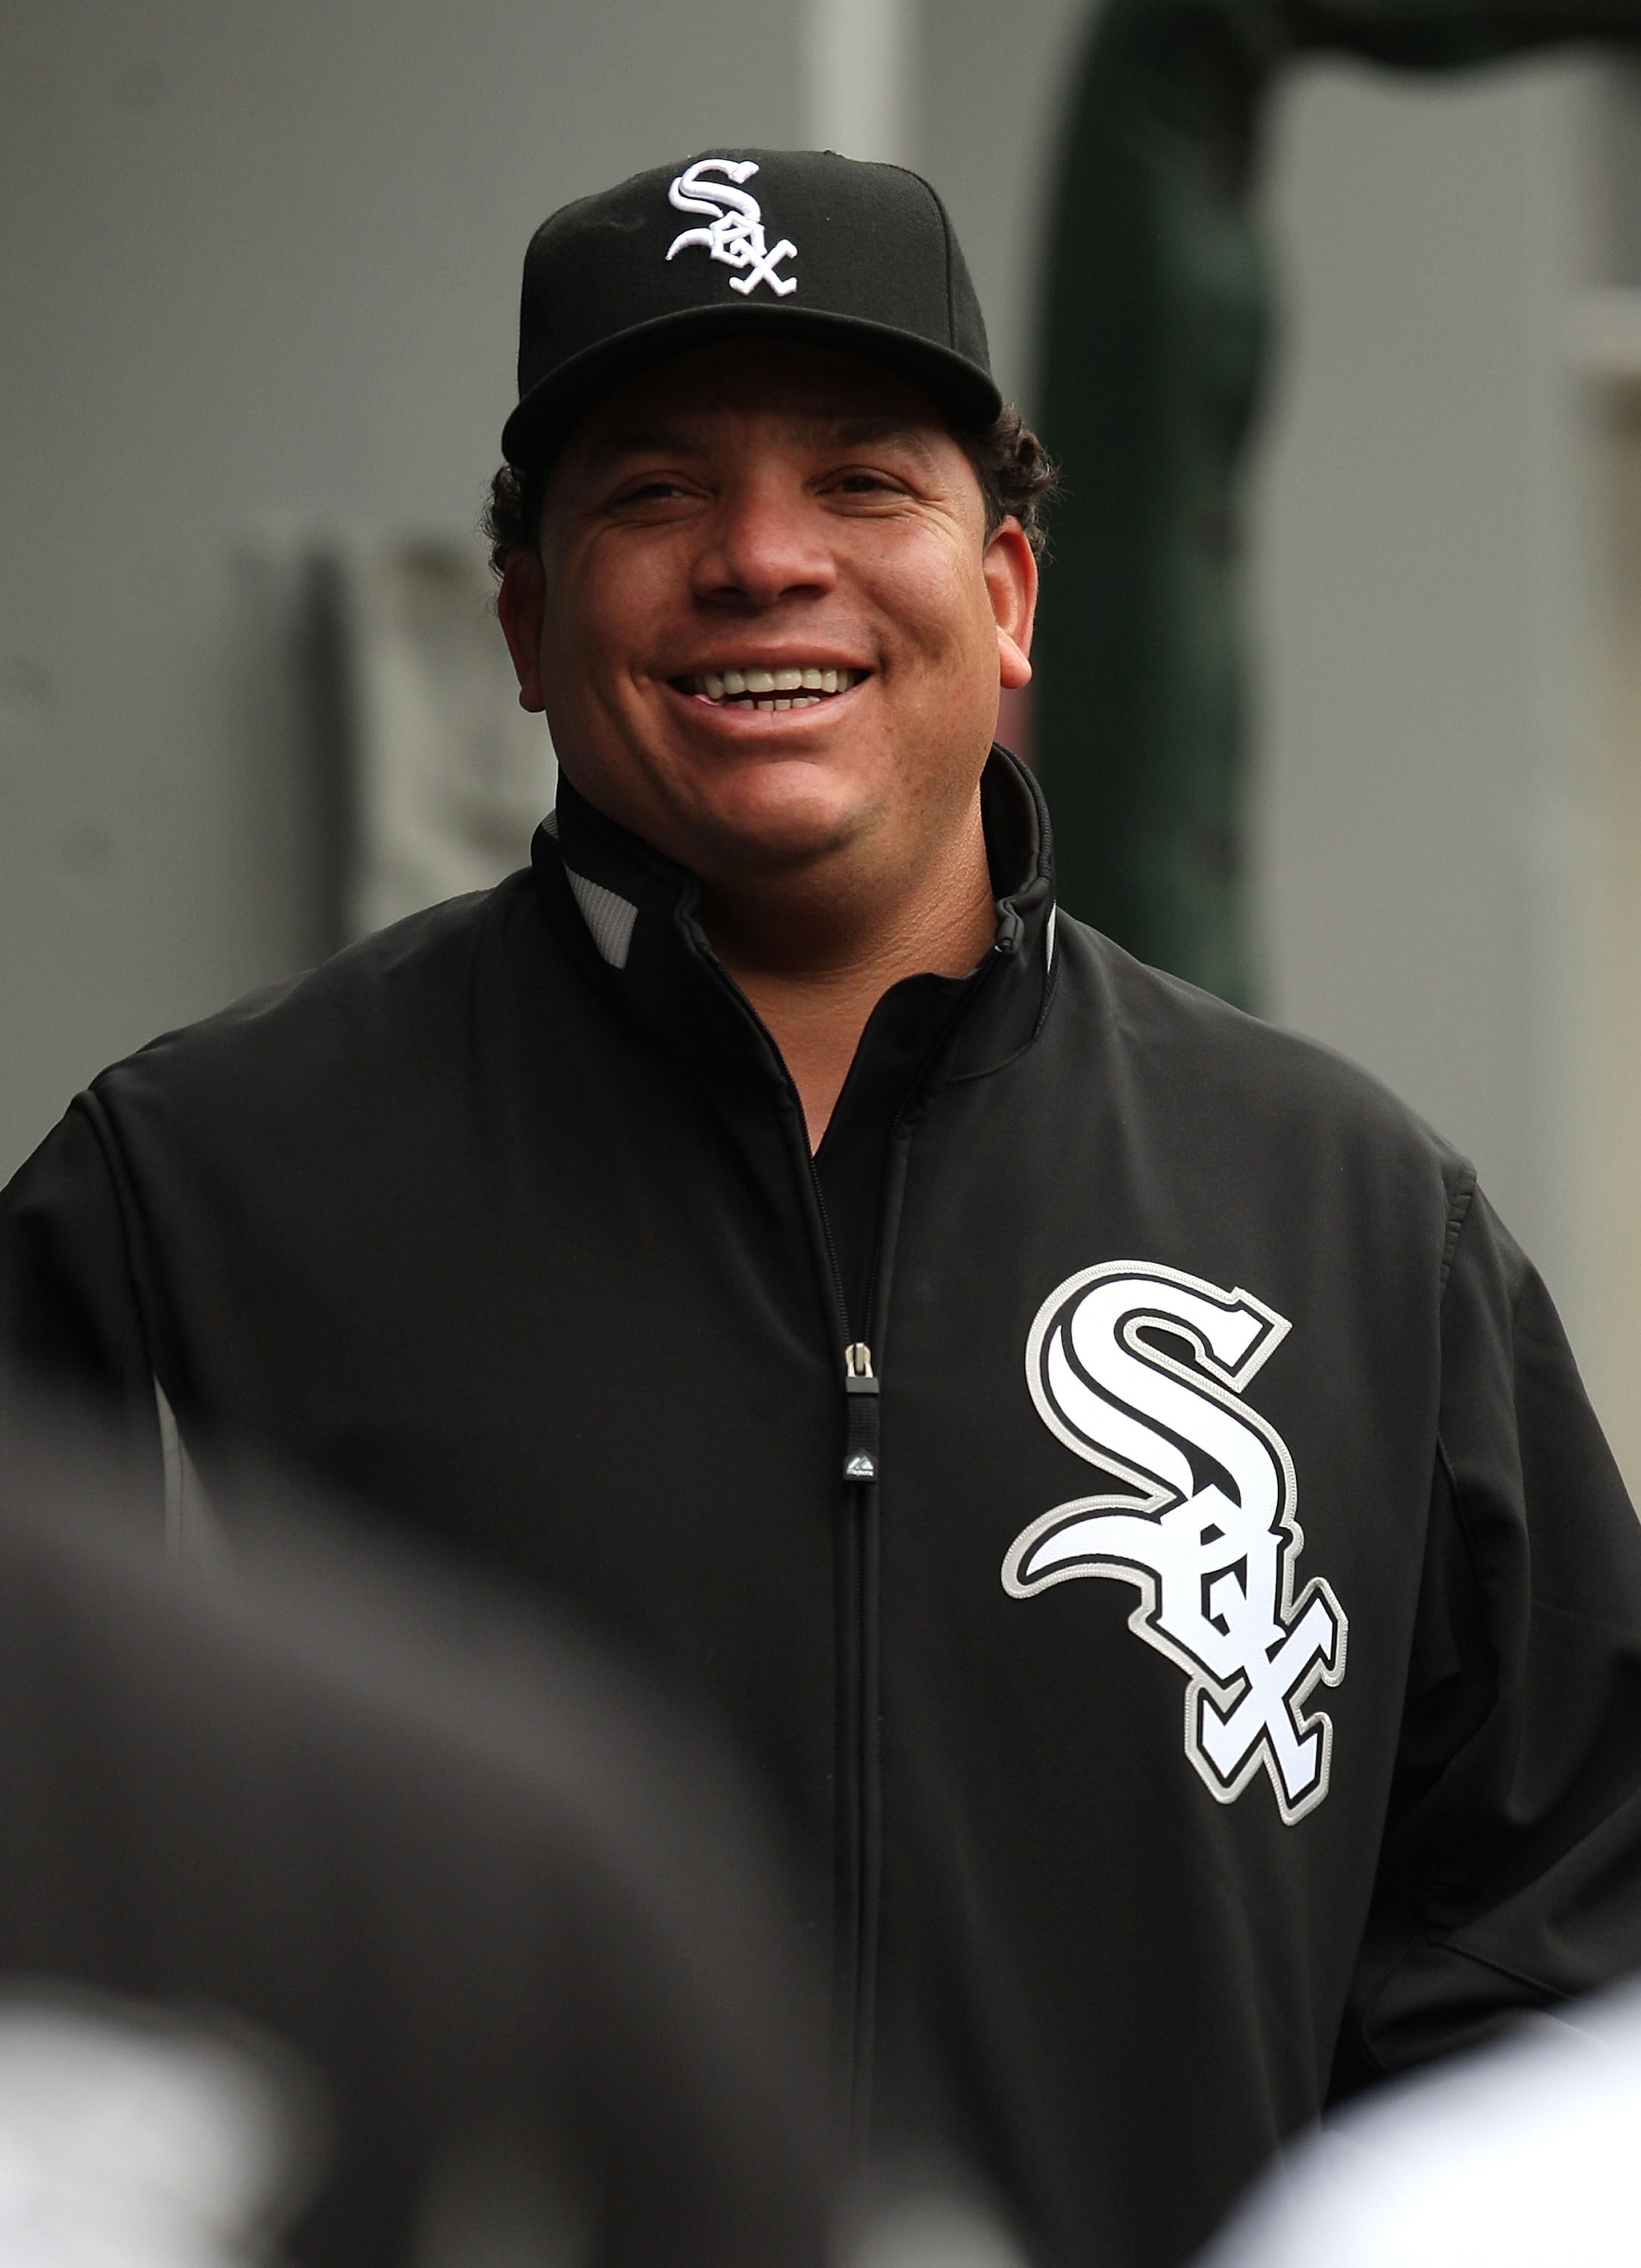 Ozzie Guillen's son Ozney Guillen learning on fly in 1st season as manager  - Chicago Sun-Times